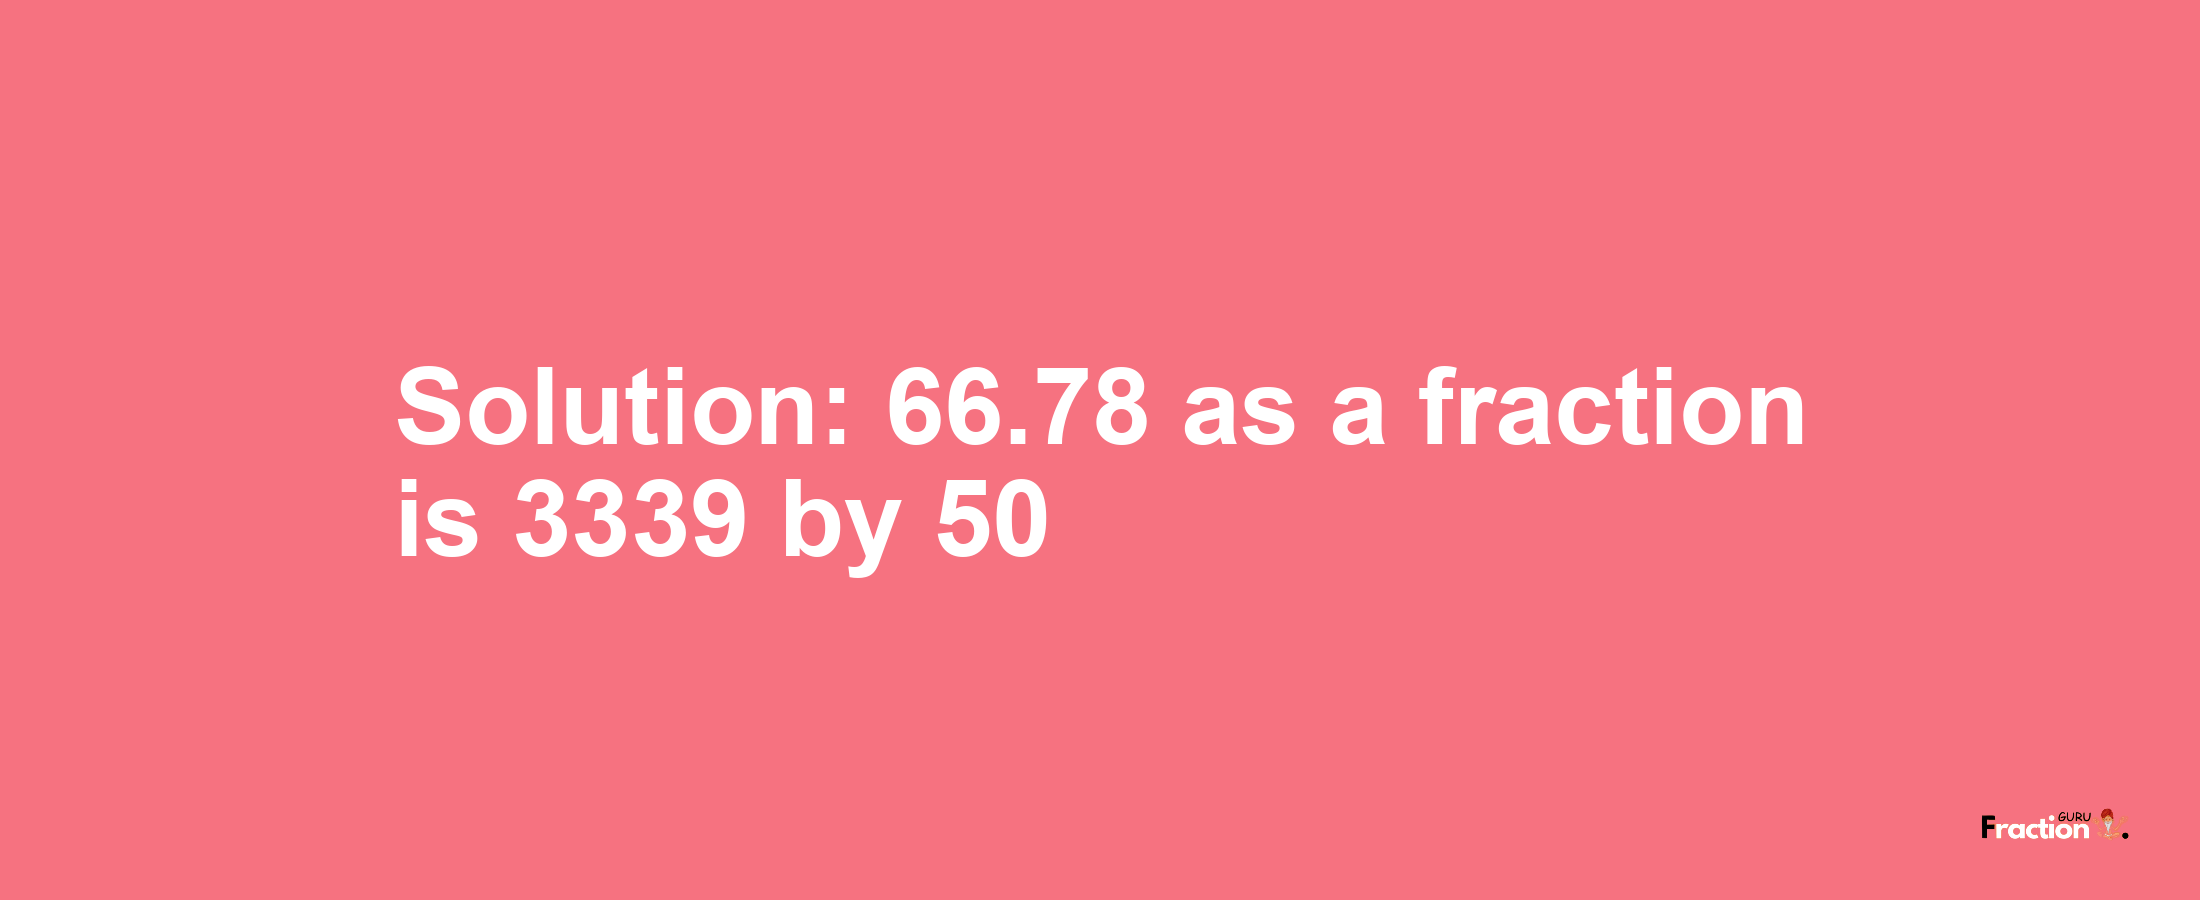 Solution:66.78 as a fraction is 3339/50